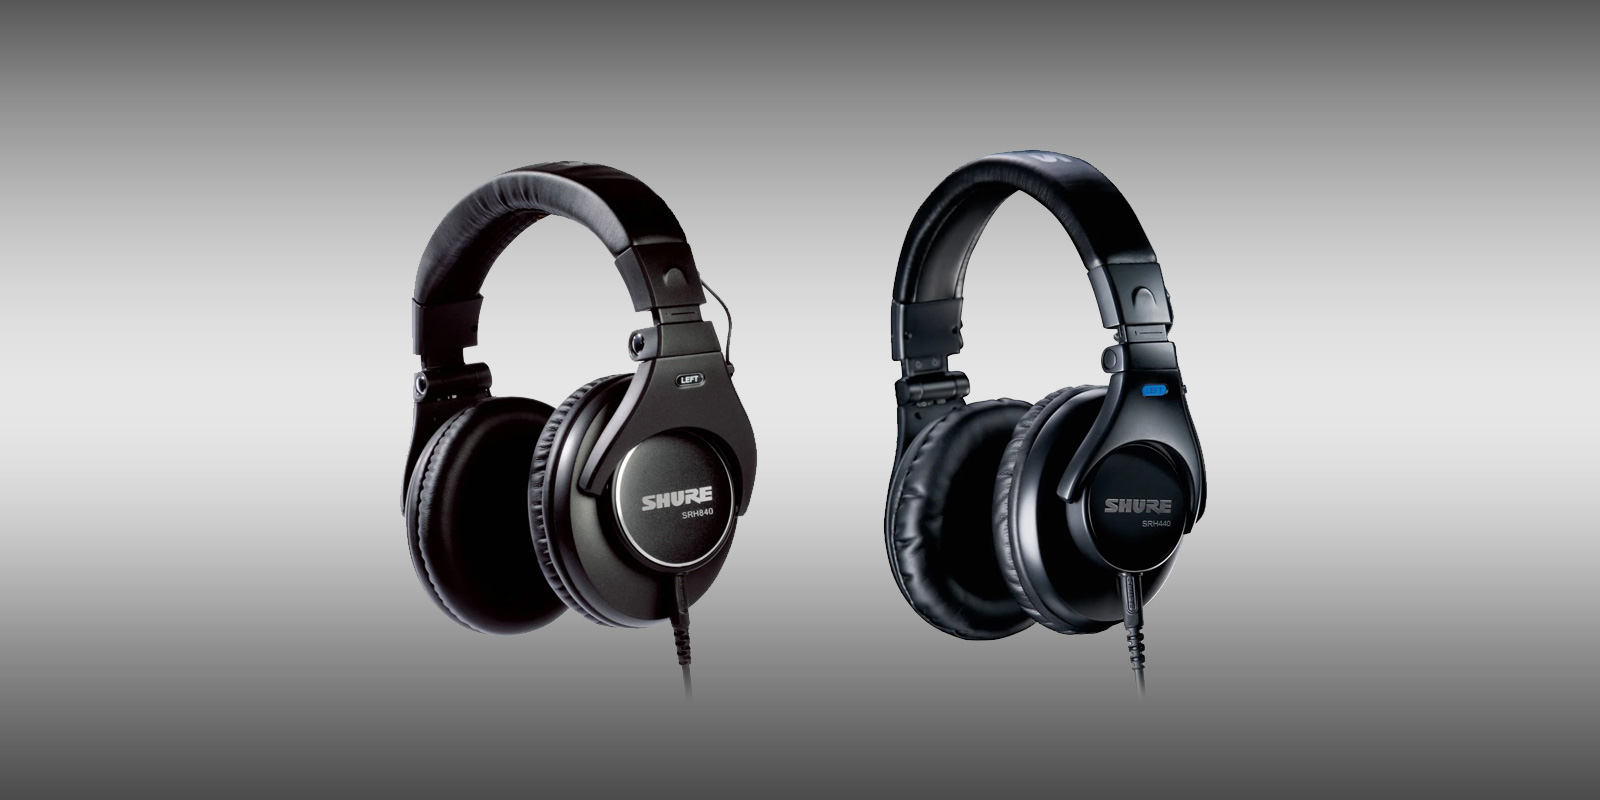 Shure Debuts a Fresh, New Look and Even Better Sound for Its Award-winning Srh840 and Srh440 Headphones